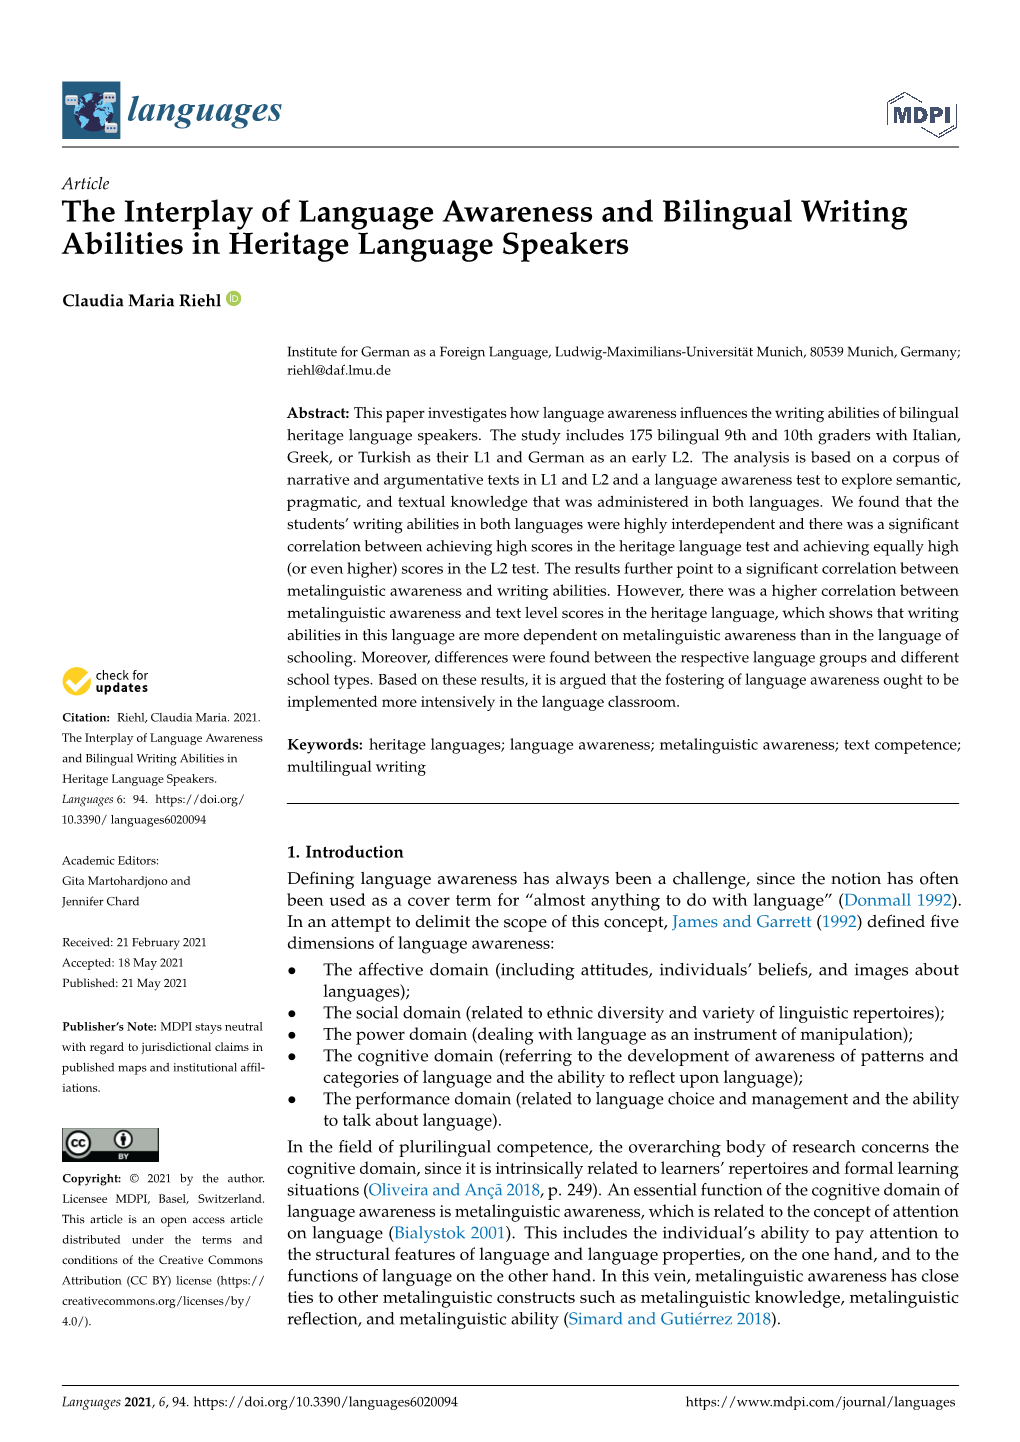 The Interplay of Language Awareness and Bilingual Writing Abilities in Heritage Language Speakers